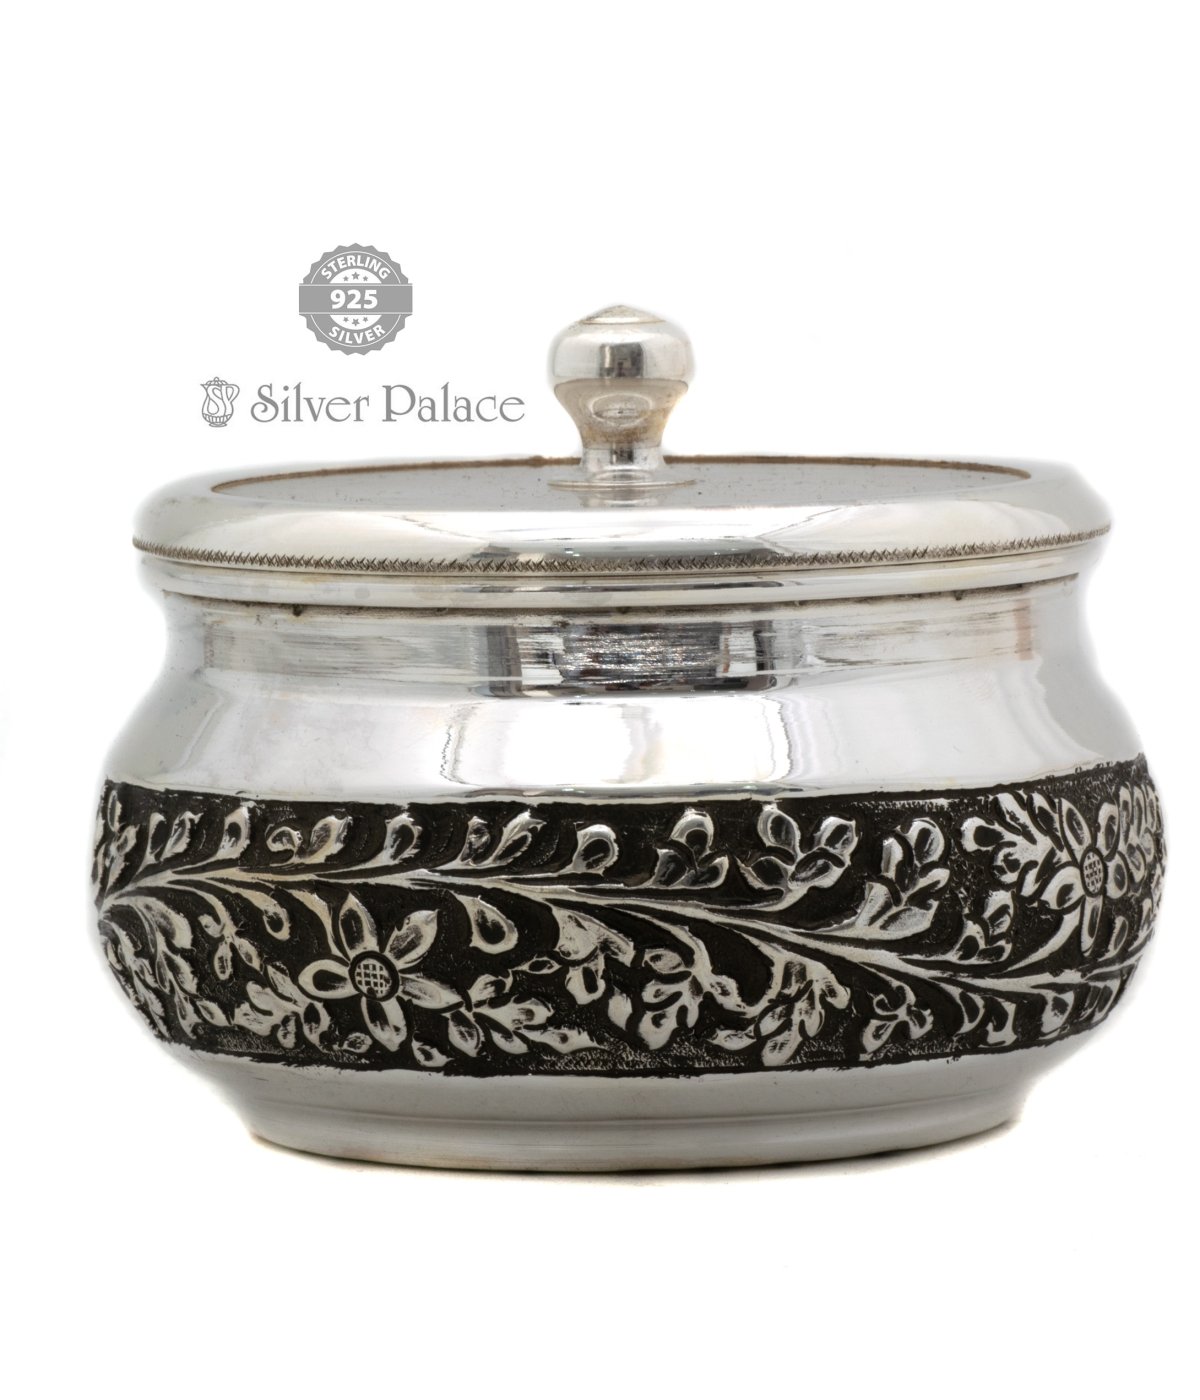 92.5 OXIDISED SILVER MULTIPURPOSE DRY FRUIT BOX FOR HOME AND TABLE USE